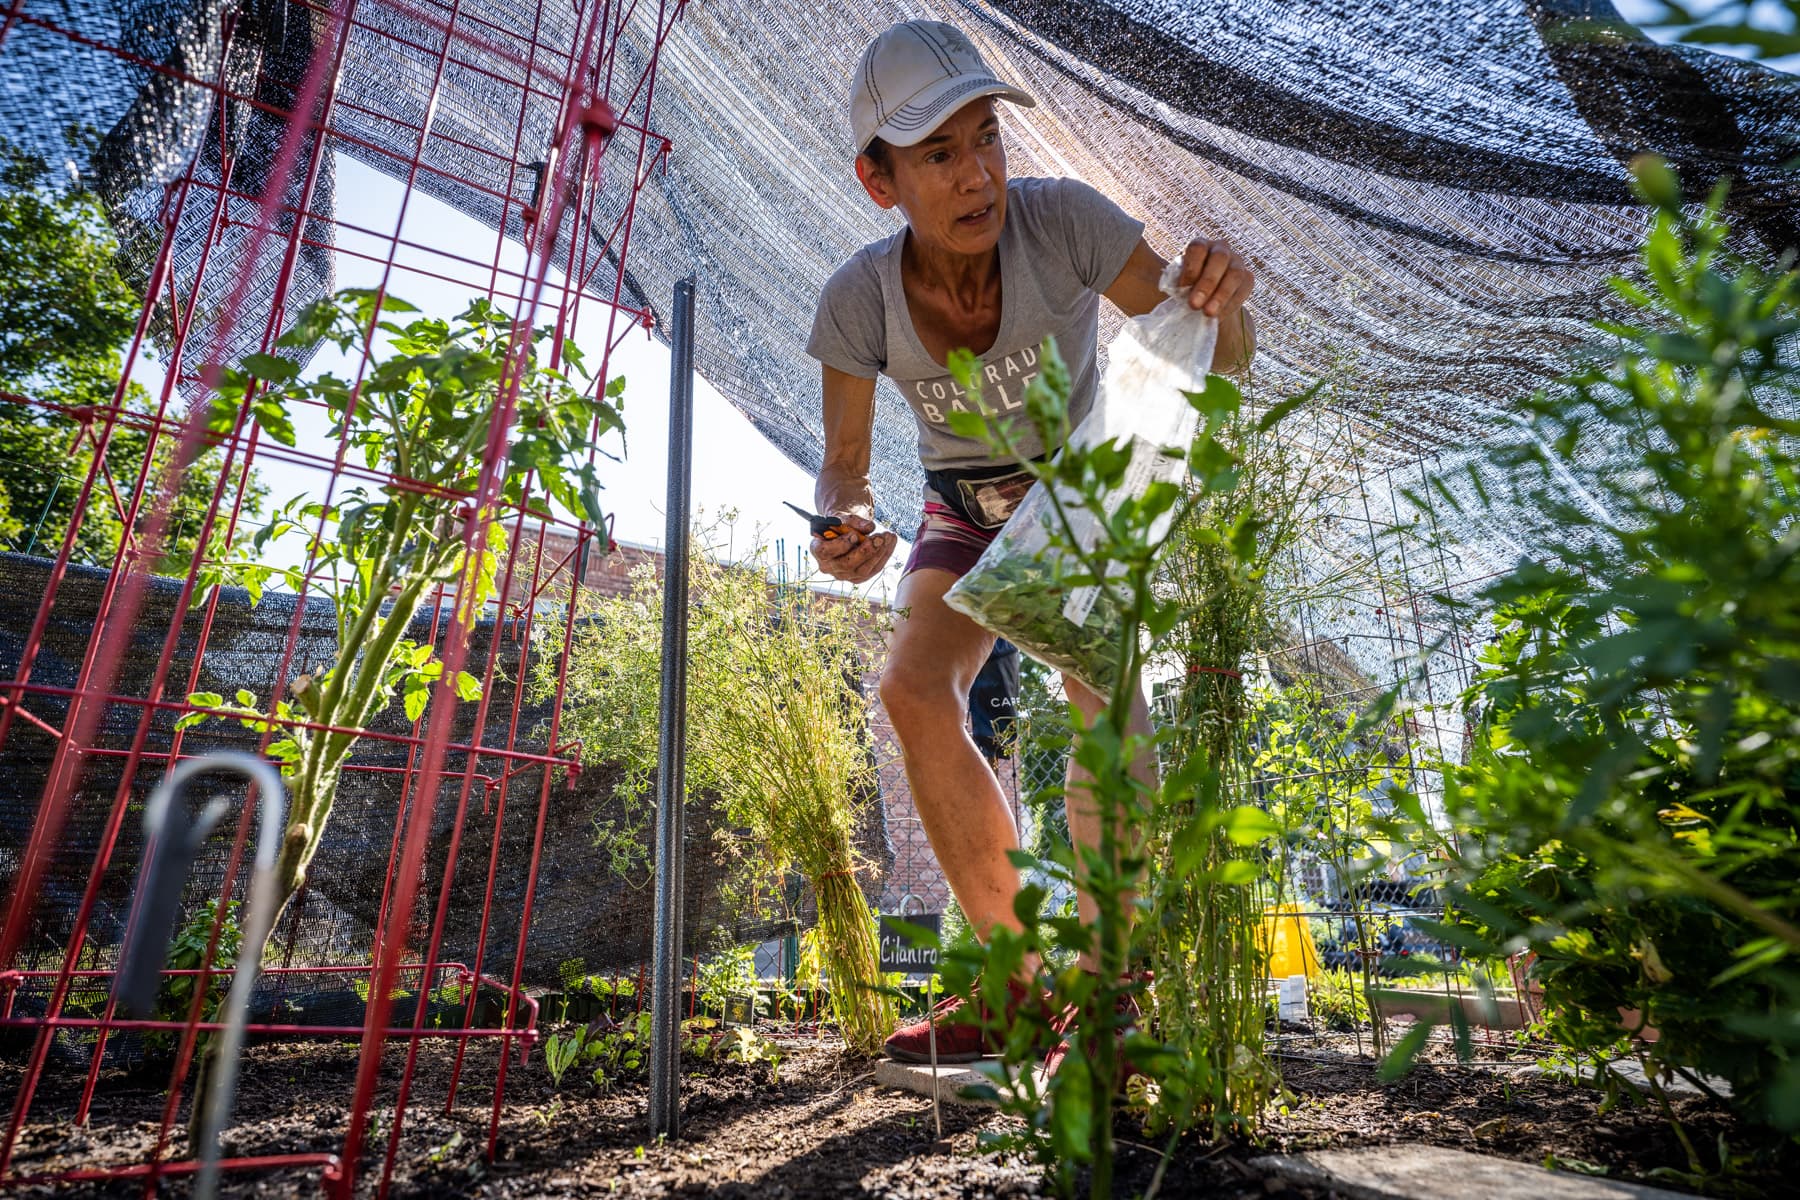 The Impact of Community Gardens on Neighborhood Unity and Compassion